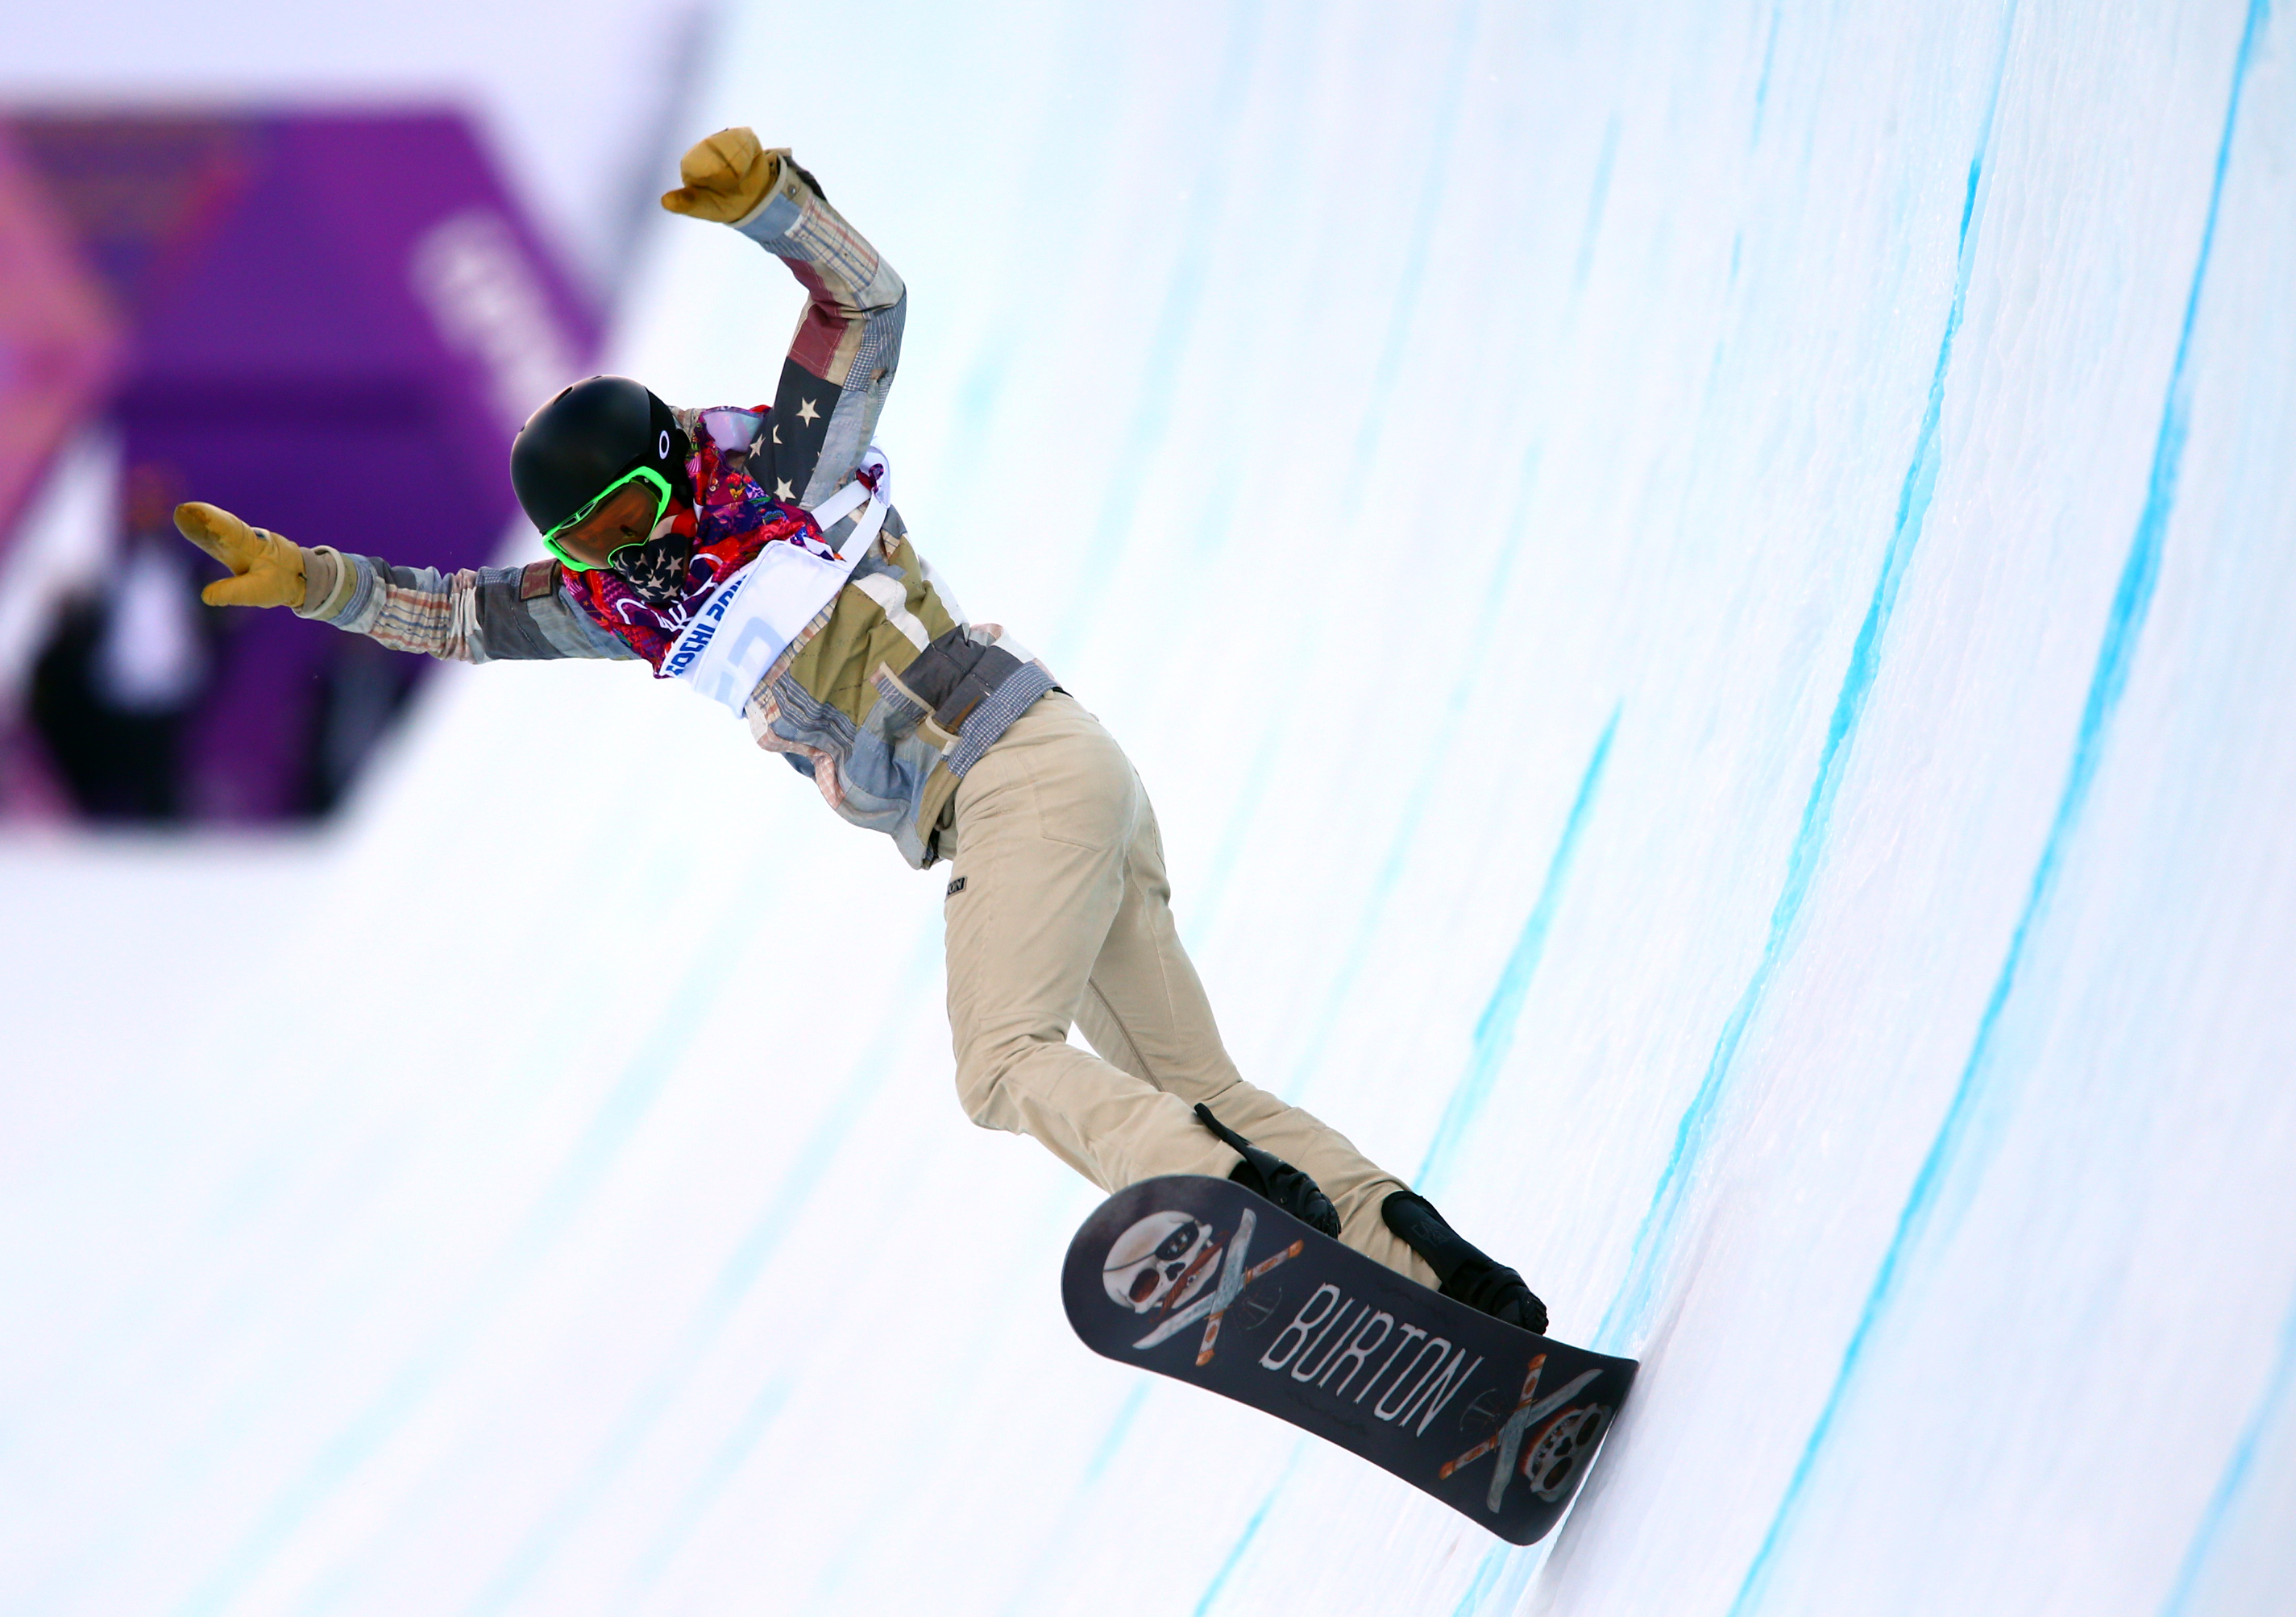 How to Watch Shaun White: The Last Run outside USA